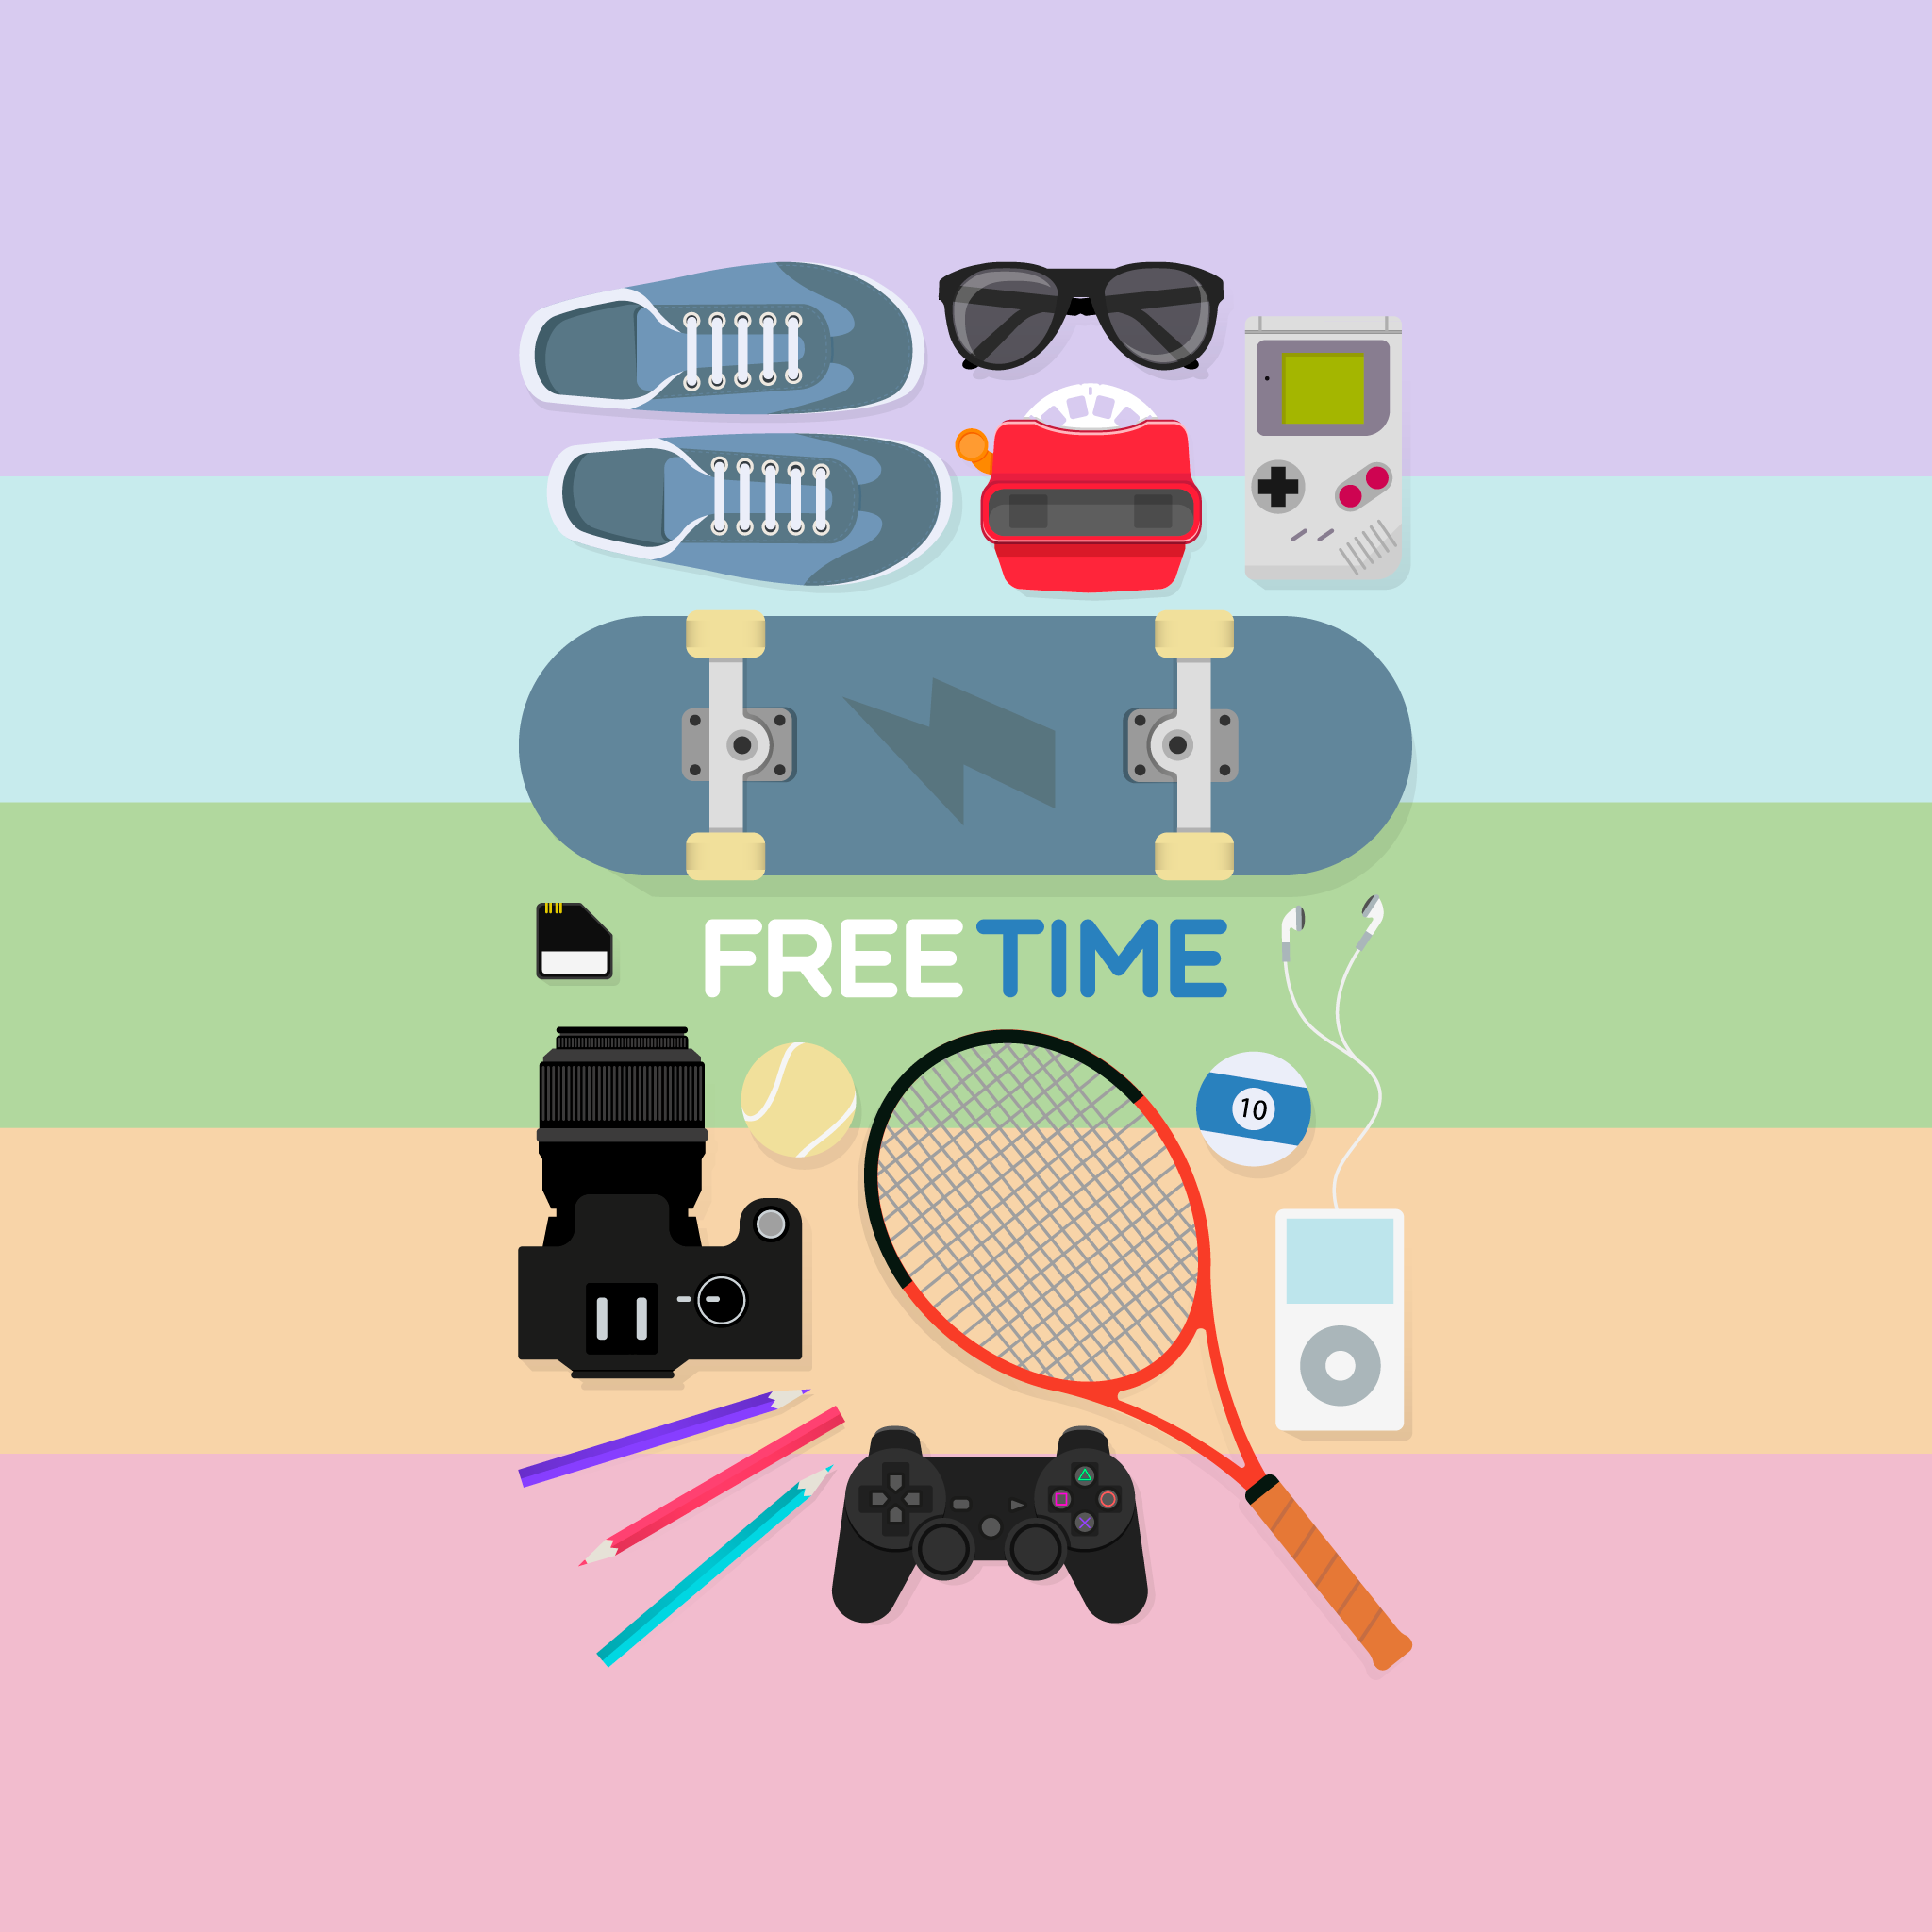 General 2048x2048 time iPod PlayStation skateboard GameBoy tennis rackets controllers artwork sport shoes glasses camera